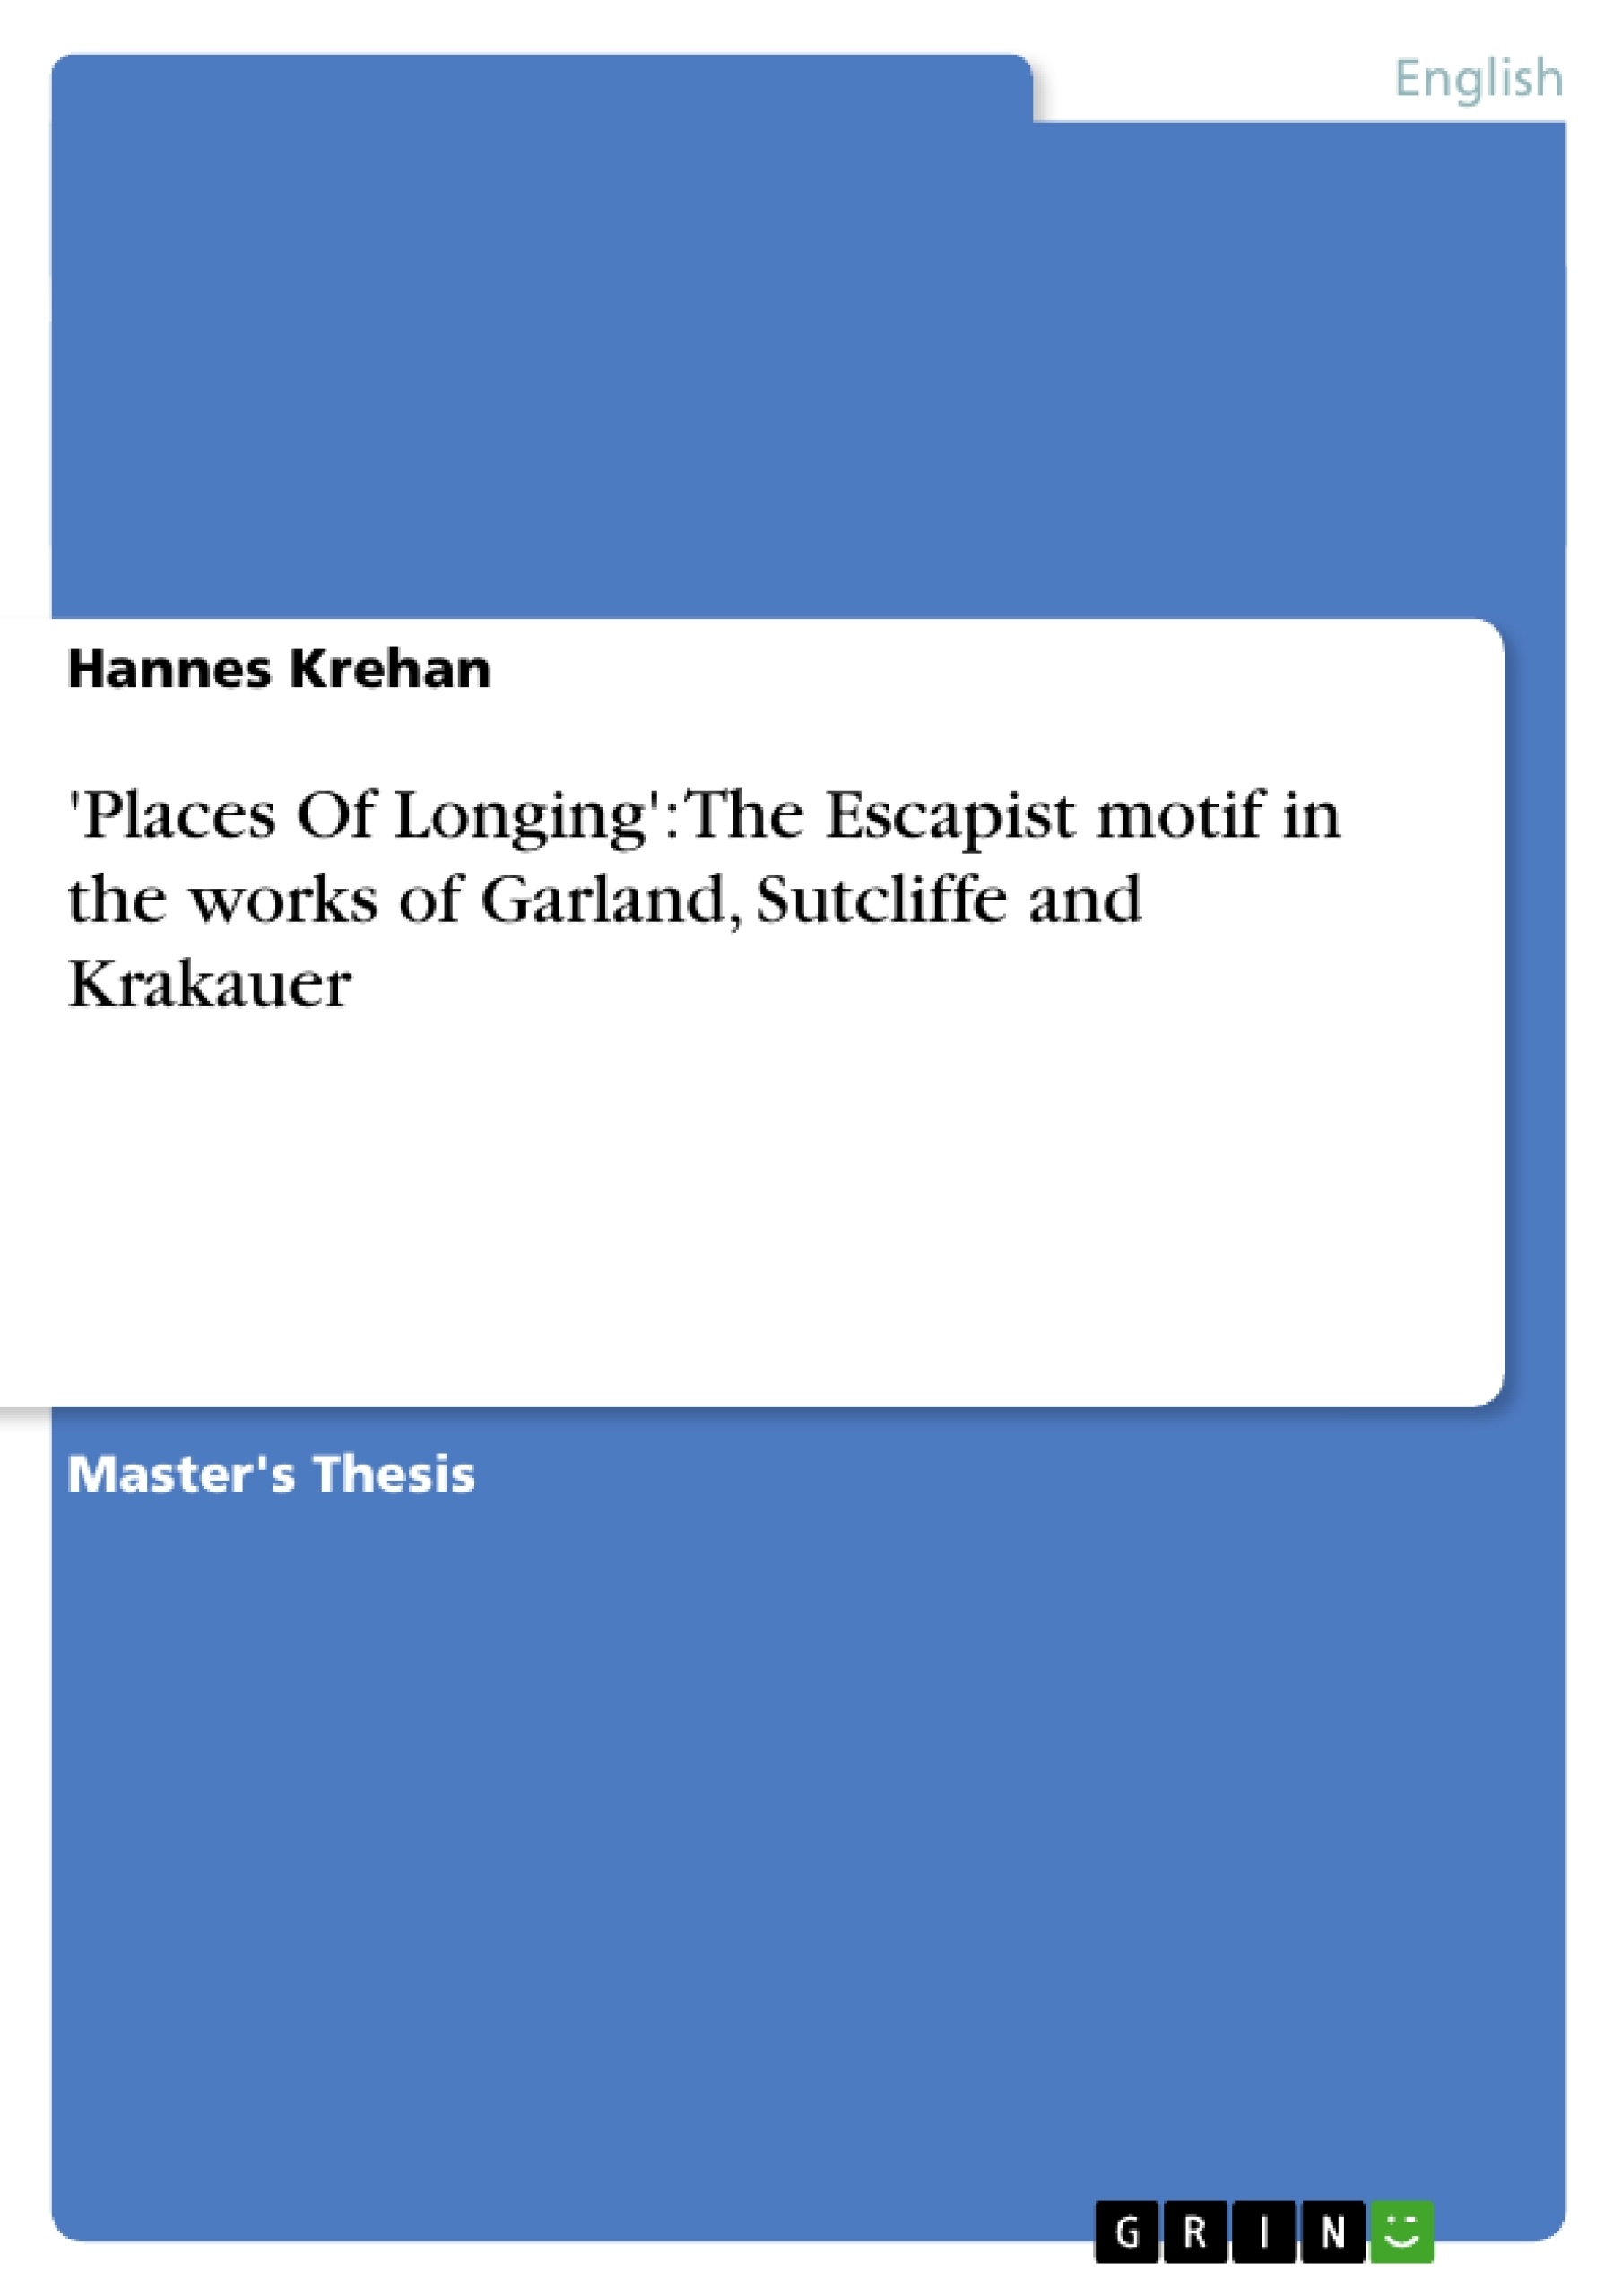 Titel: 'Places Of Longing': The Escapist motif in the works of Garland, Sutcliffe and Krakauer